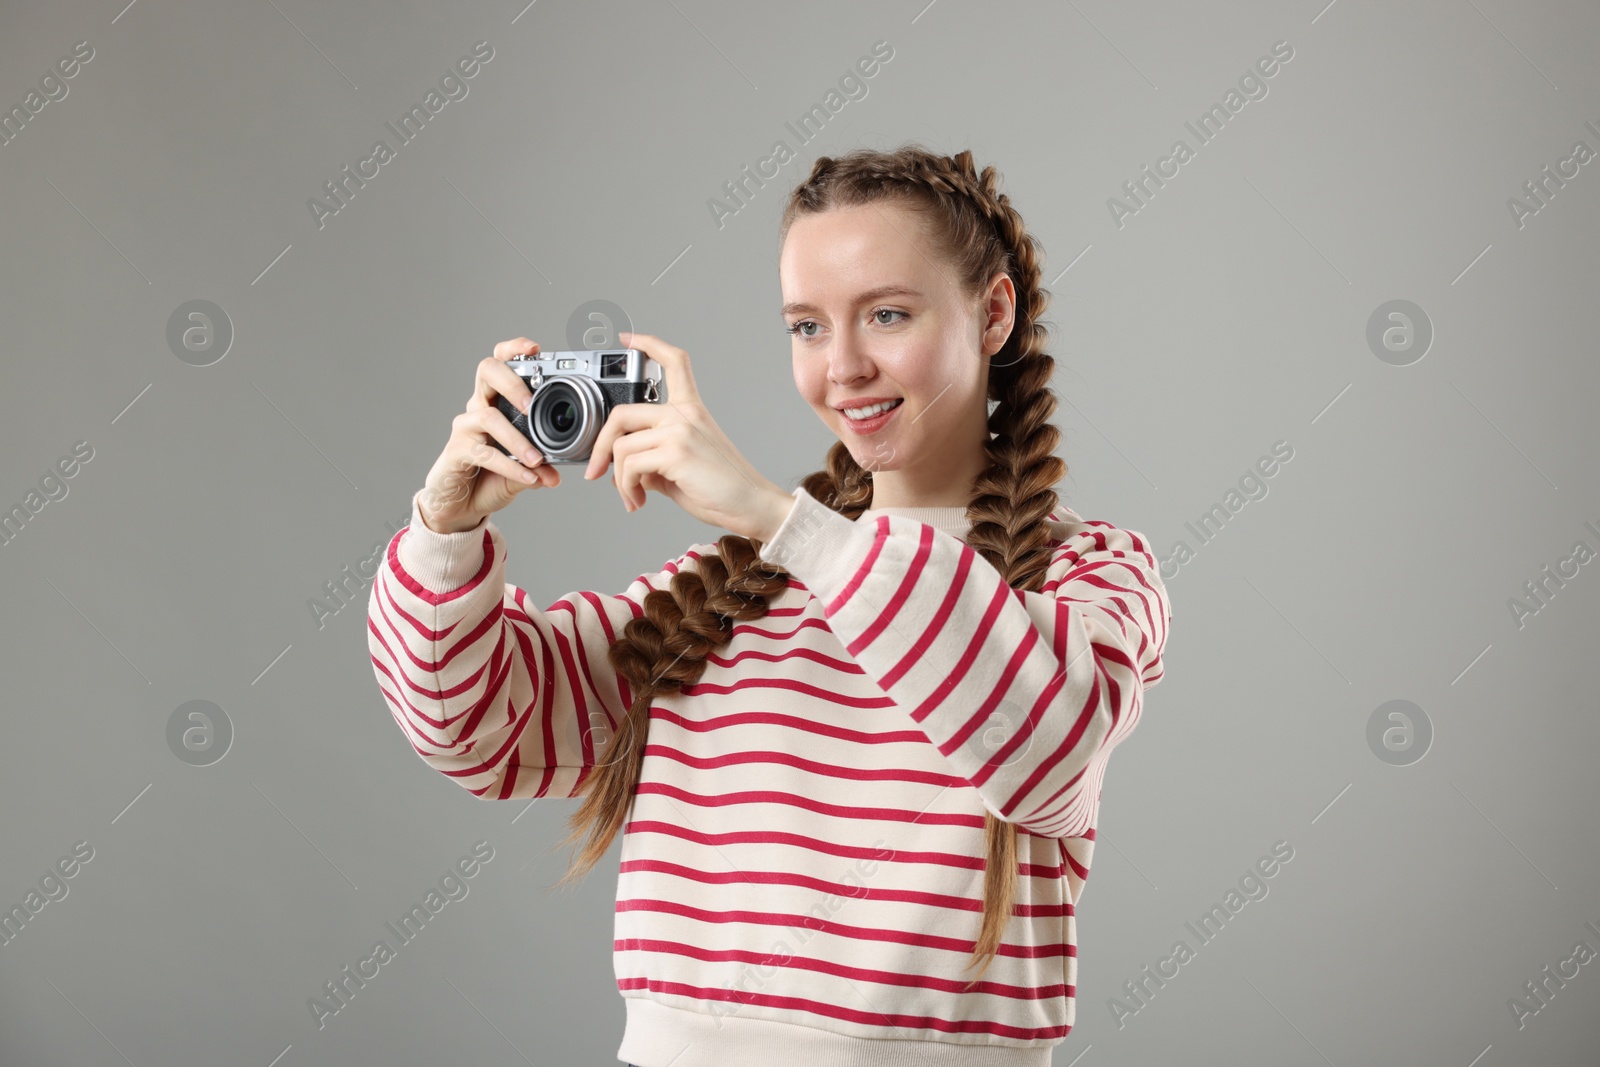 Photo of Woman with braided hair taking photo on grey background